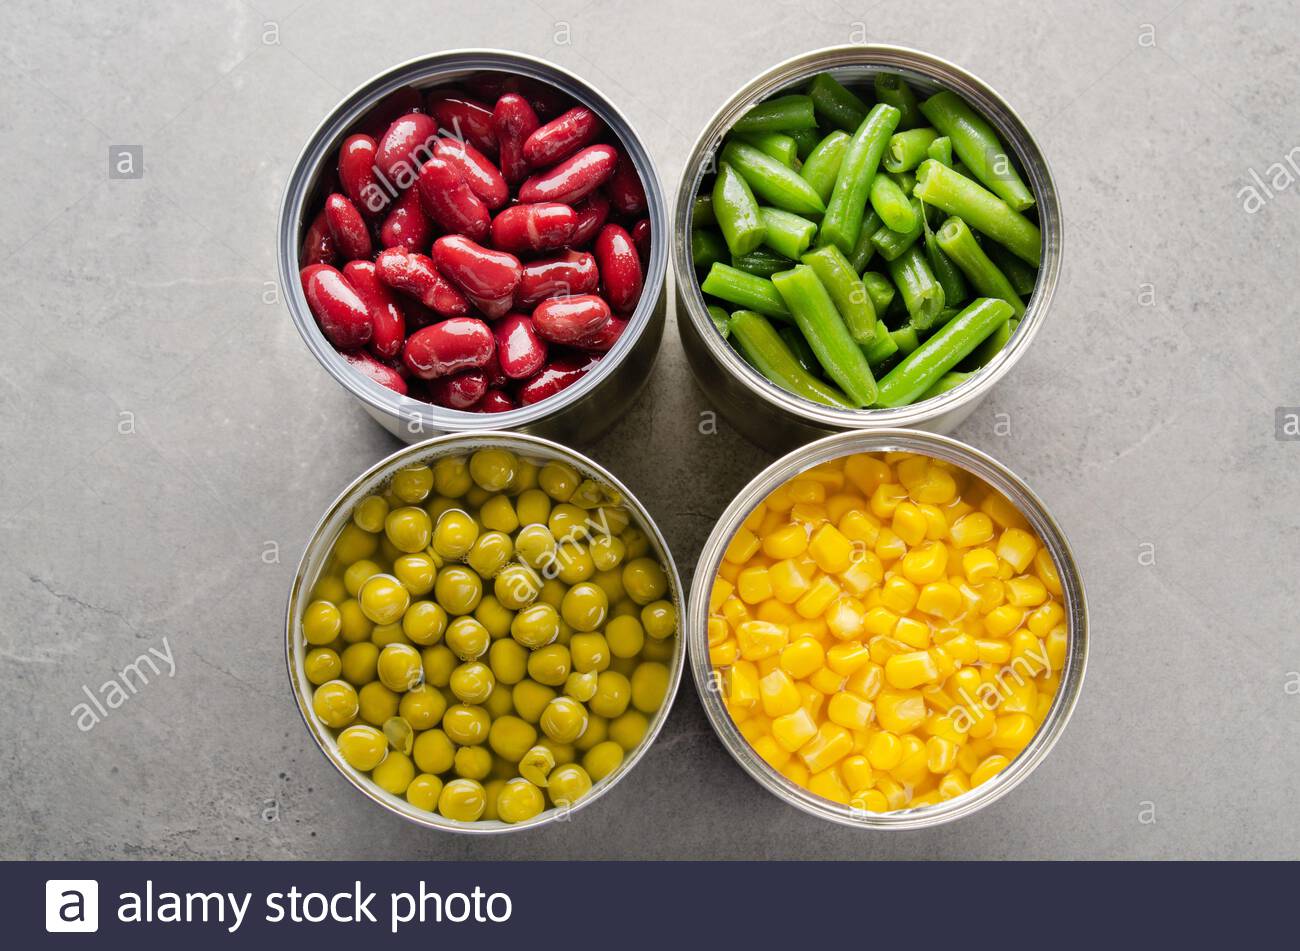 Download Red Kidney Beans In Can High Resolution Stock Photography And Images Alamy Yellowimages Mockups